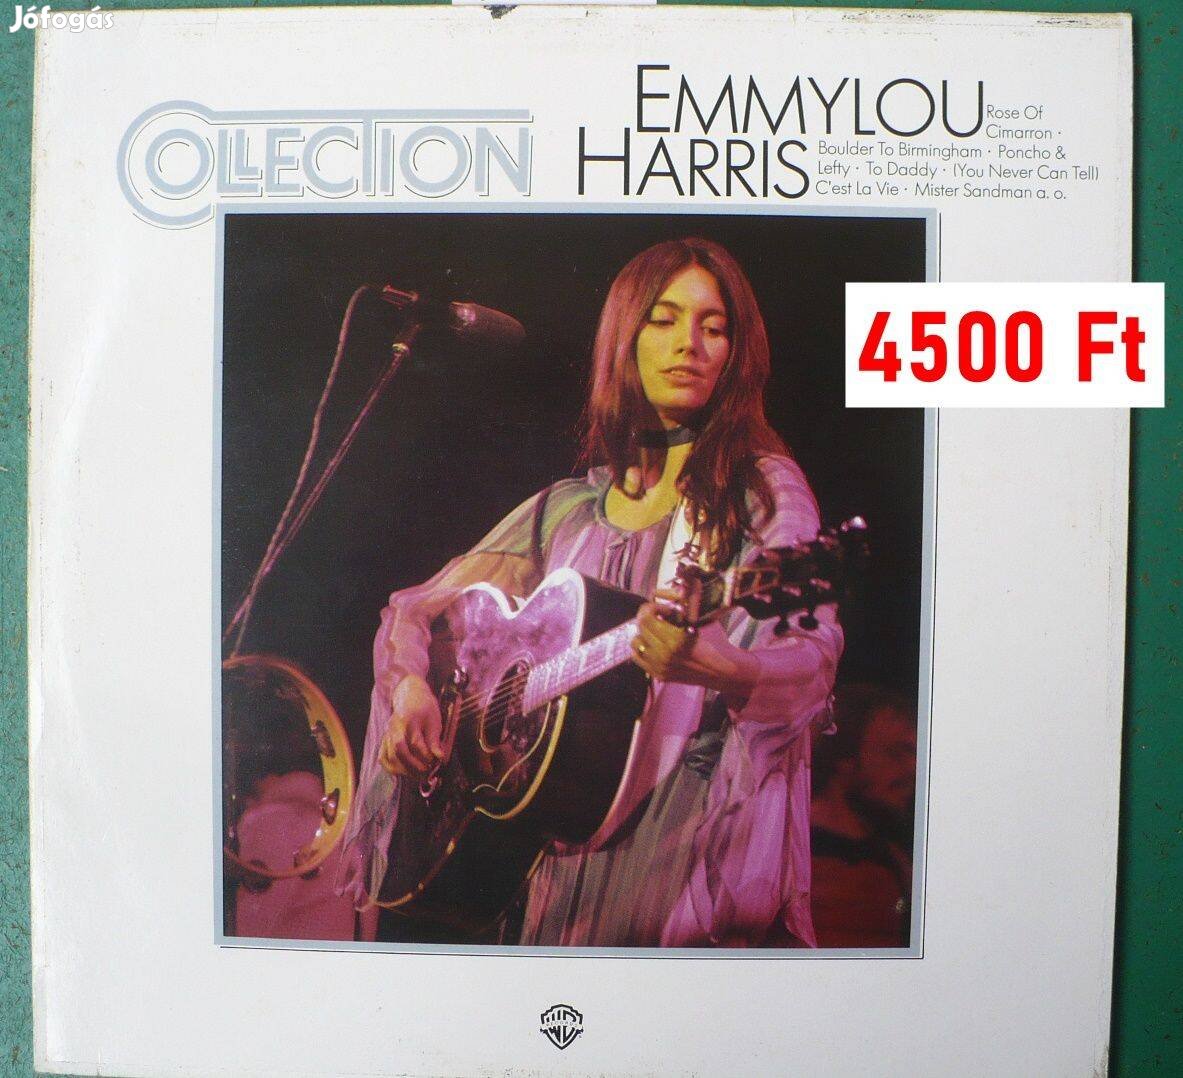 Emmylou Harris: Collection / Eurithmit: Touch / Hit List Special (LP)